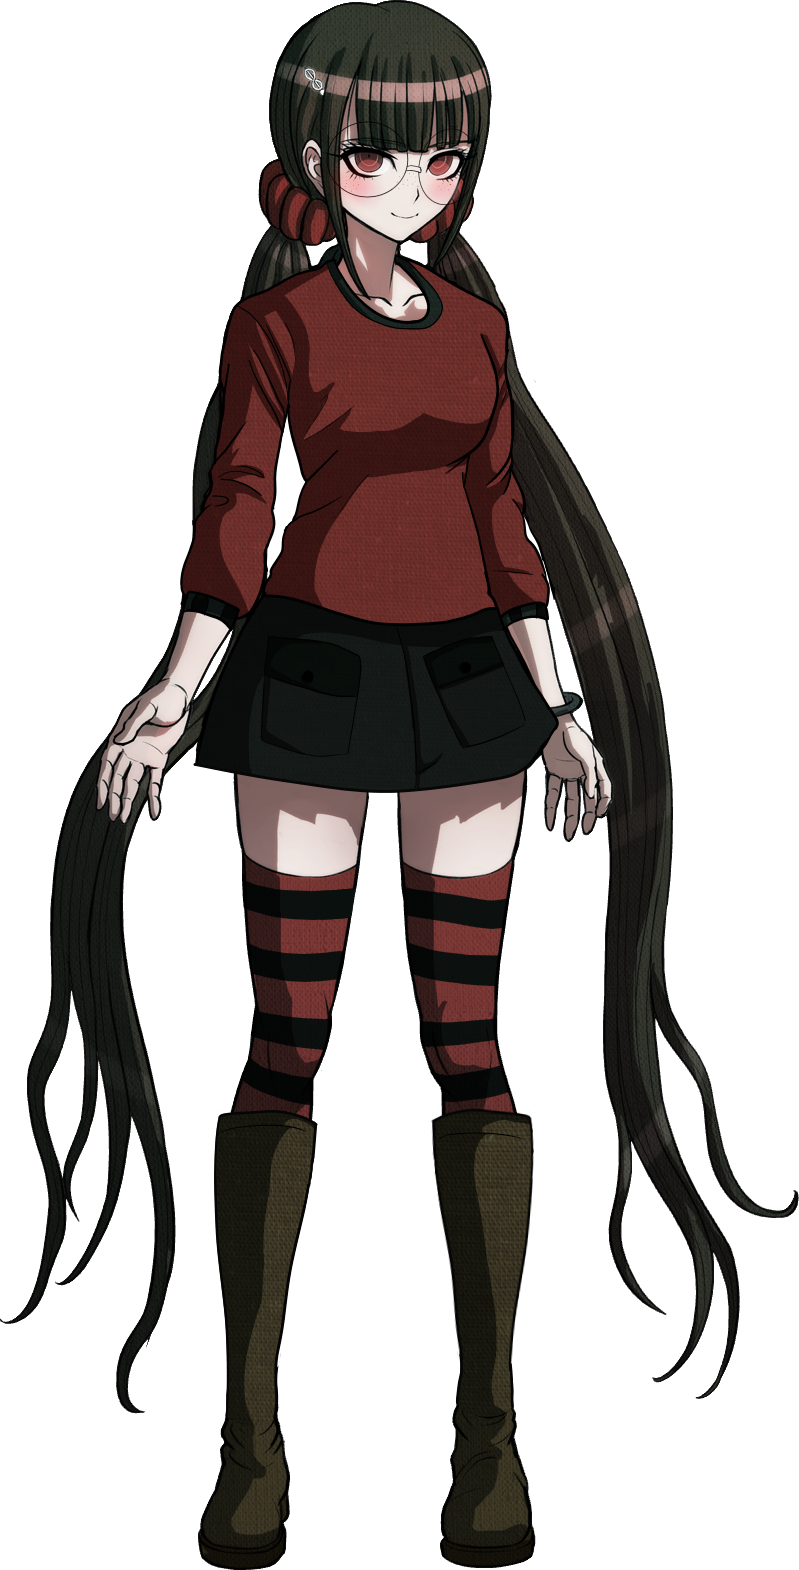 Sprite Edits and Trash — can you do a sprite edit of Maki with freckles,...